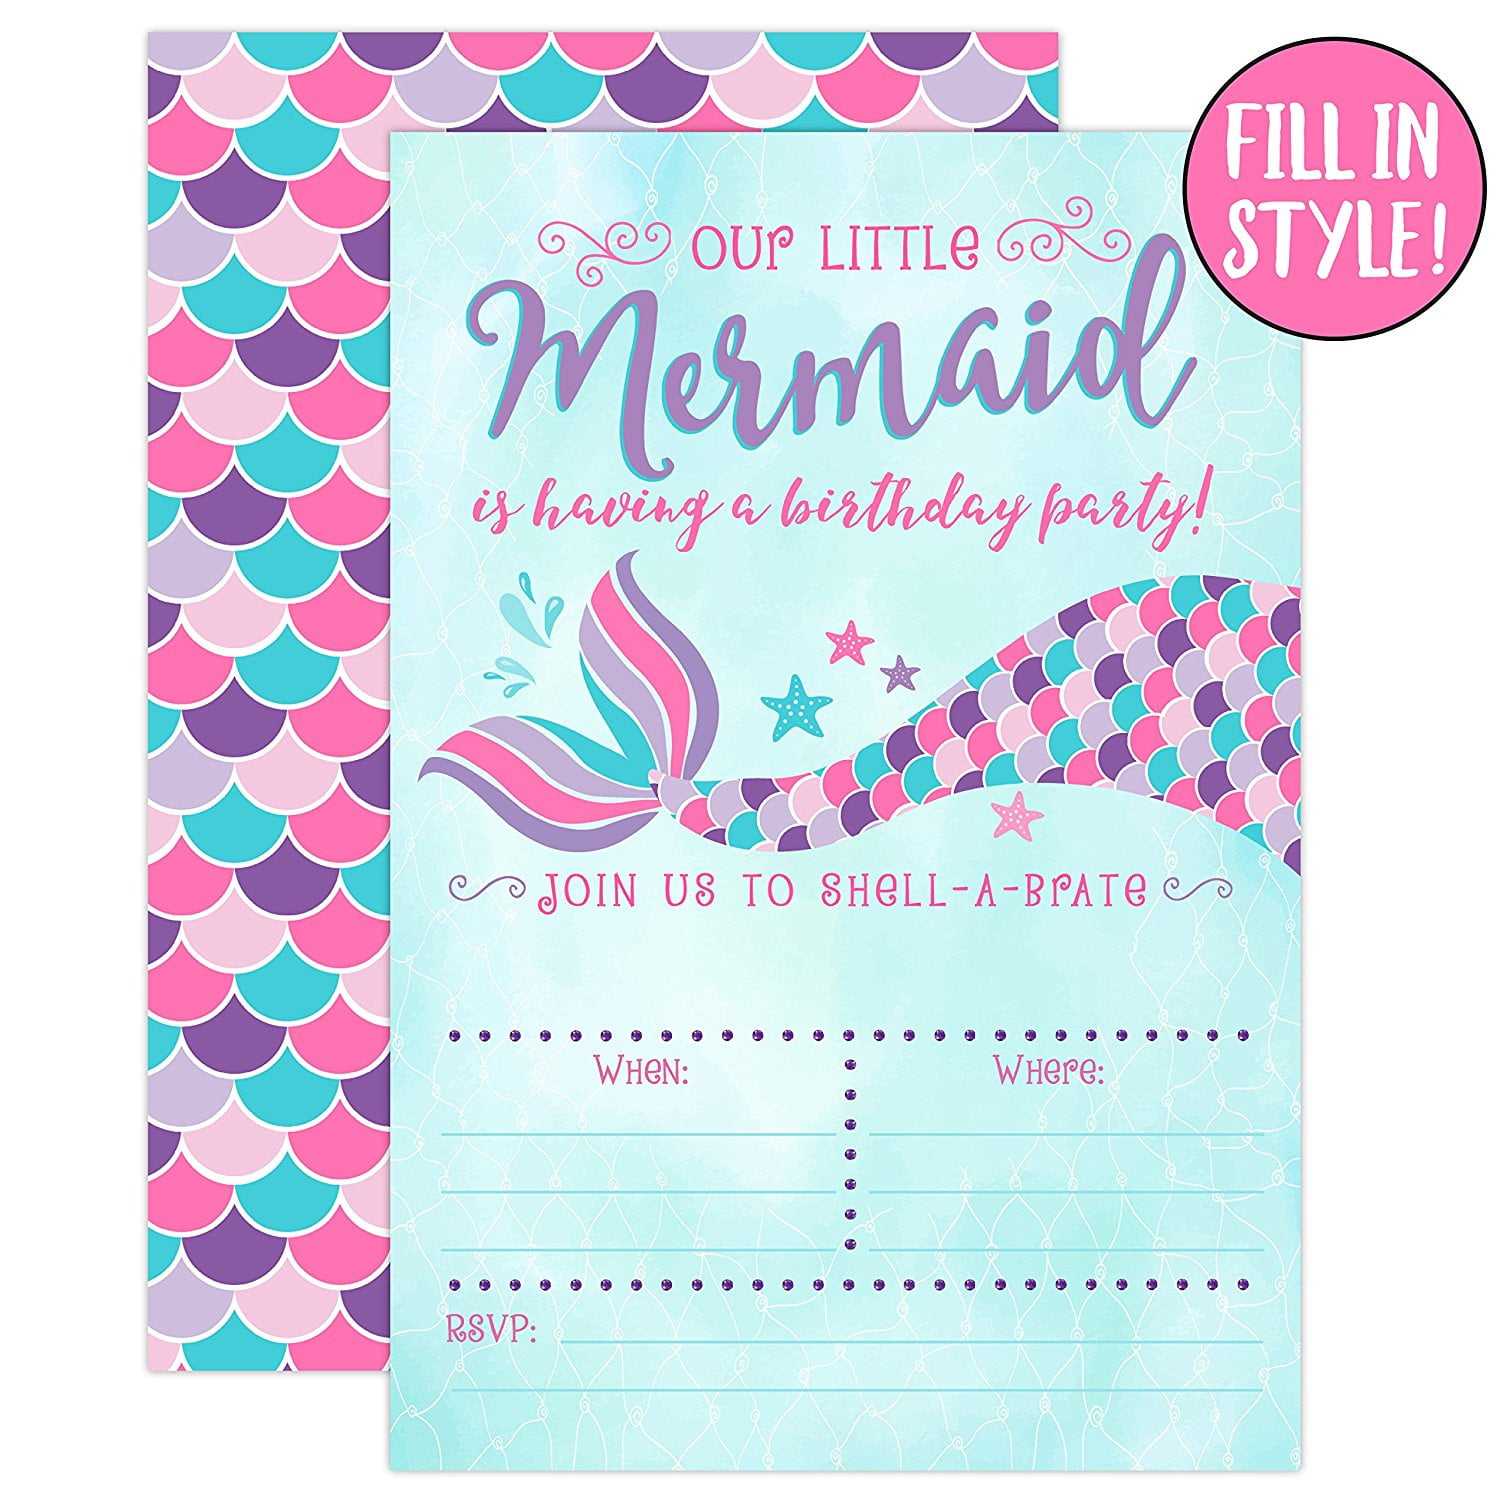 Mermaid Birthday Invitations, Pink and Purple, 20 Fill In Mermaid Party